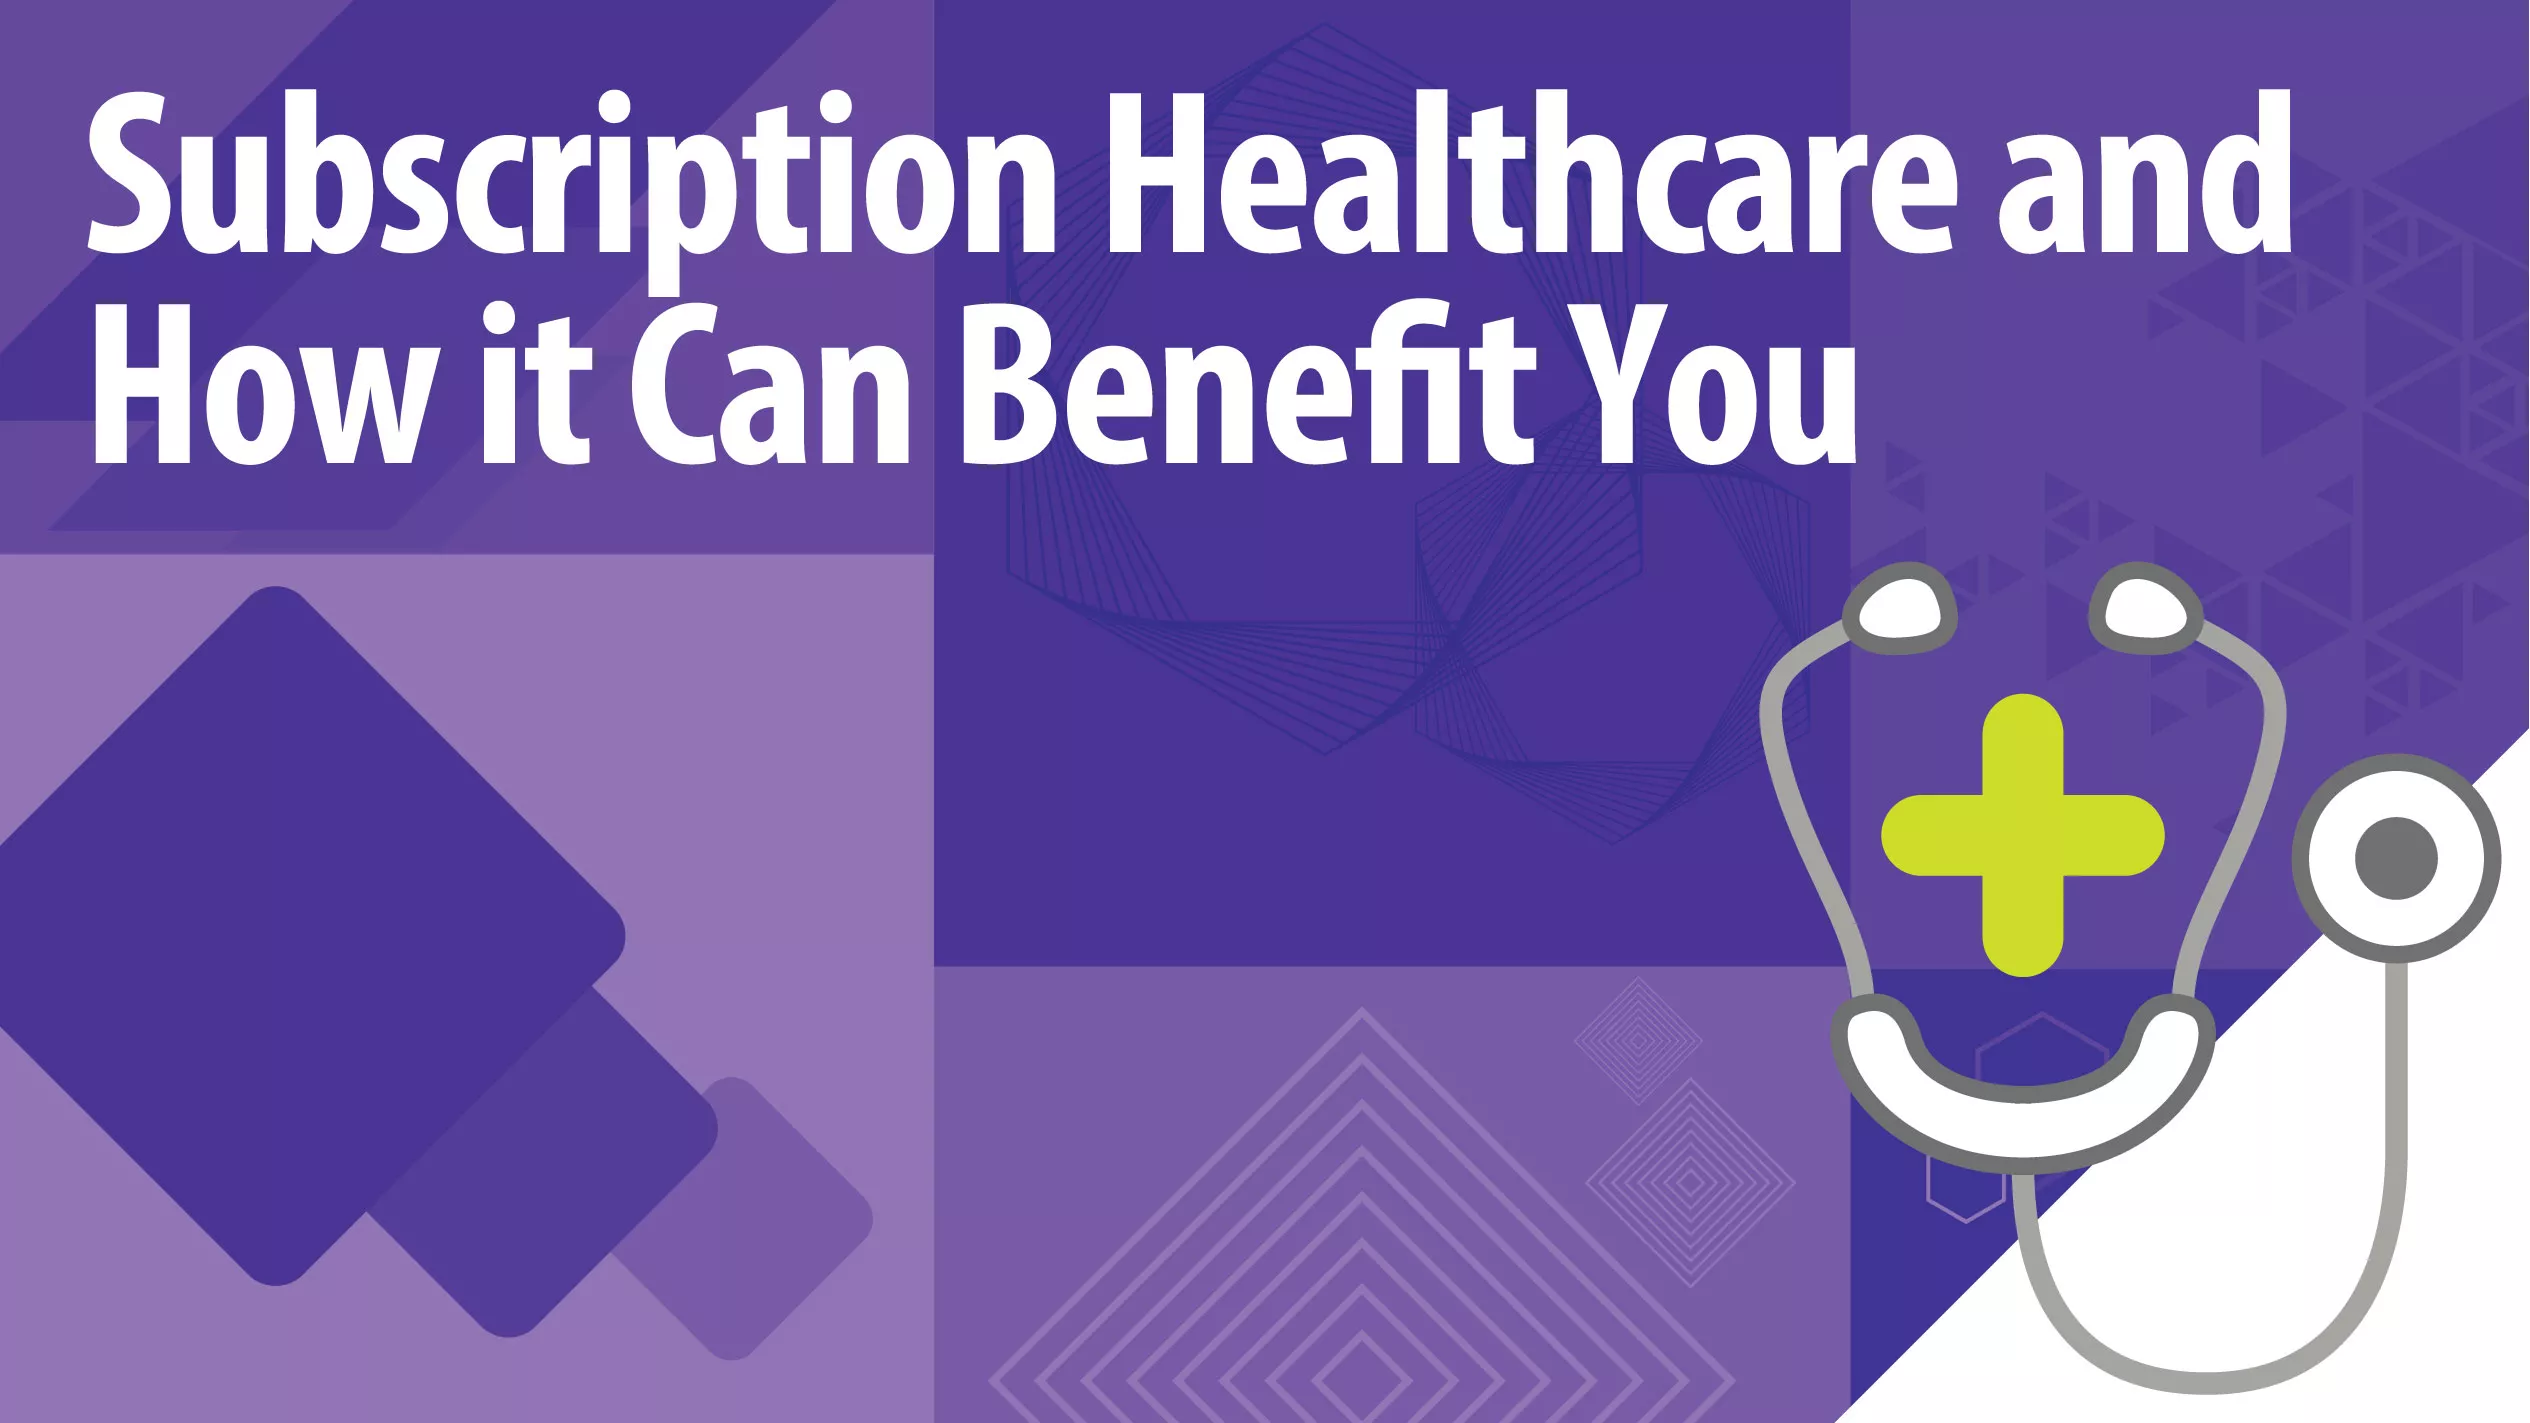 Subscription Healthcare Article Header